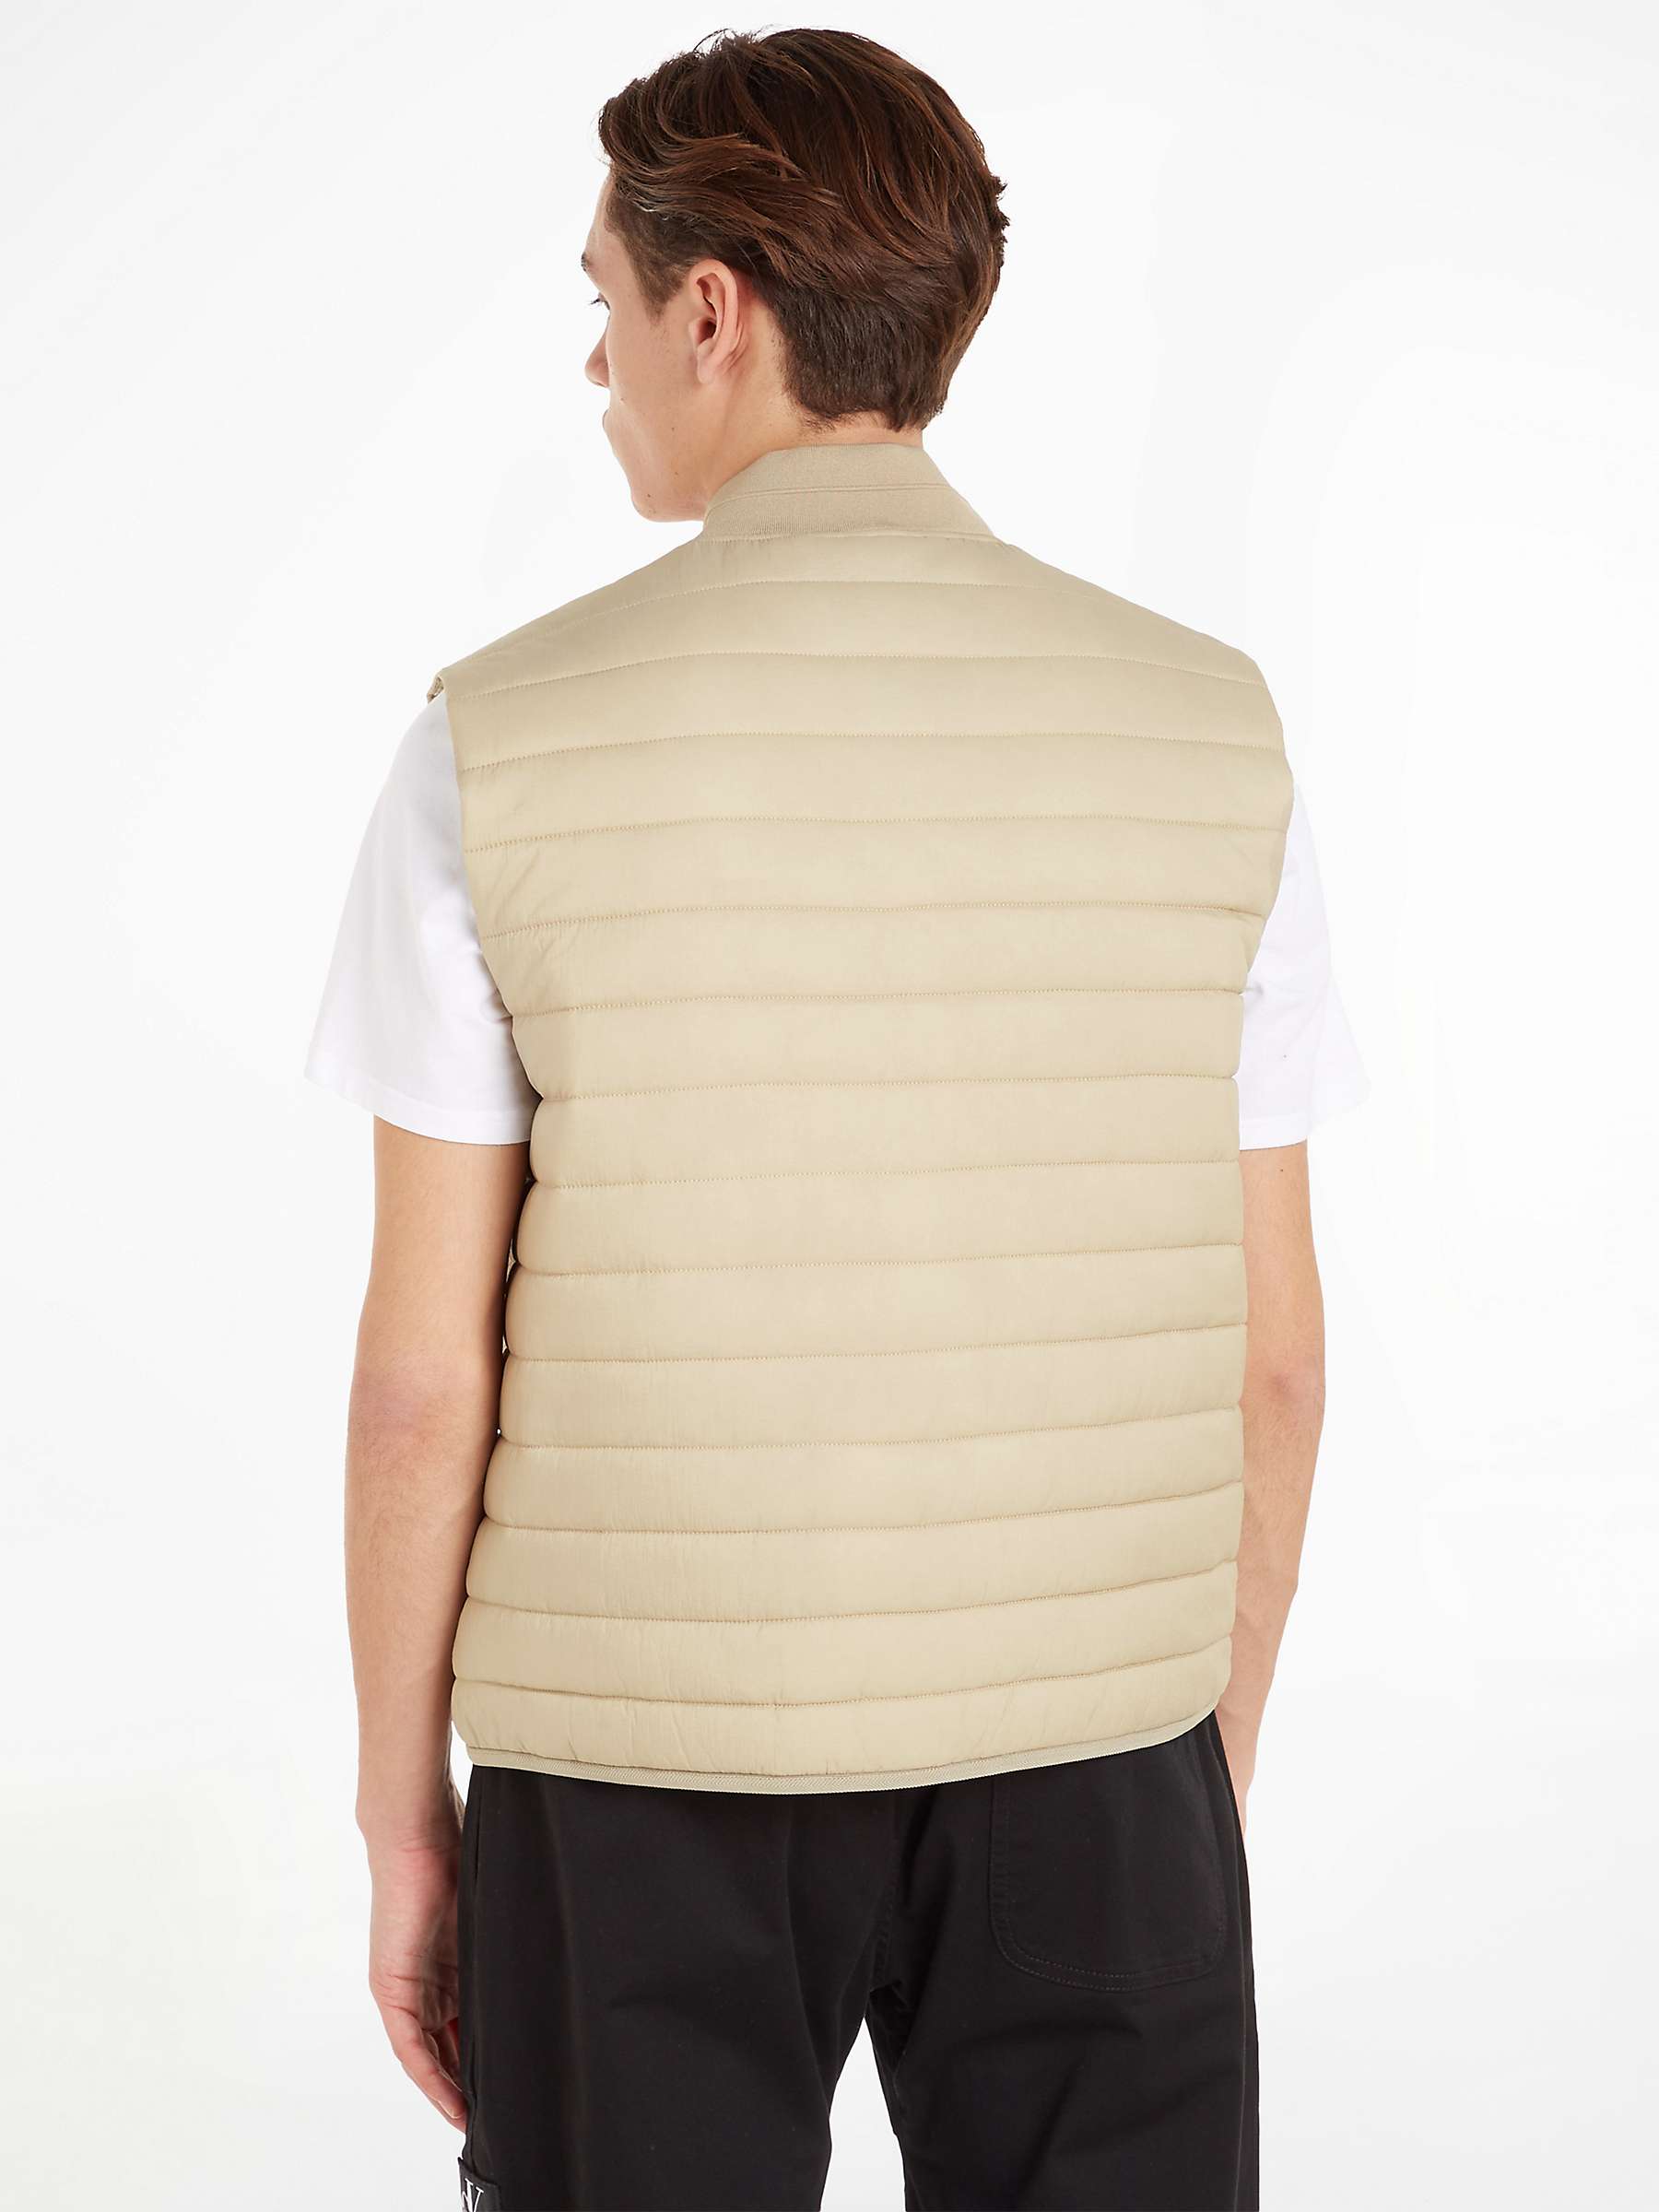 Buy Calvin Klein Crinkle Quilted Gilet, Clay Online at johnlewis.com